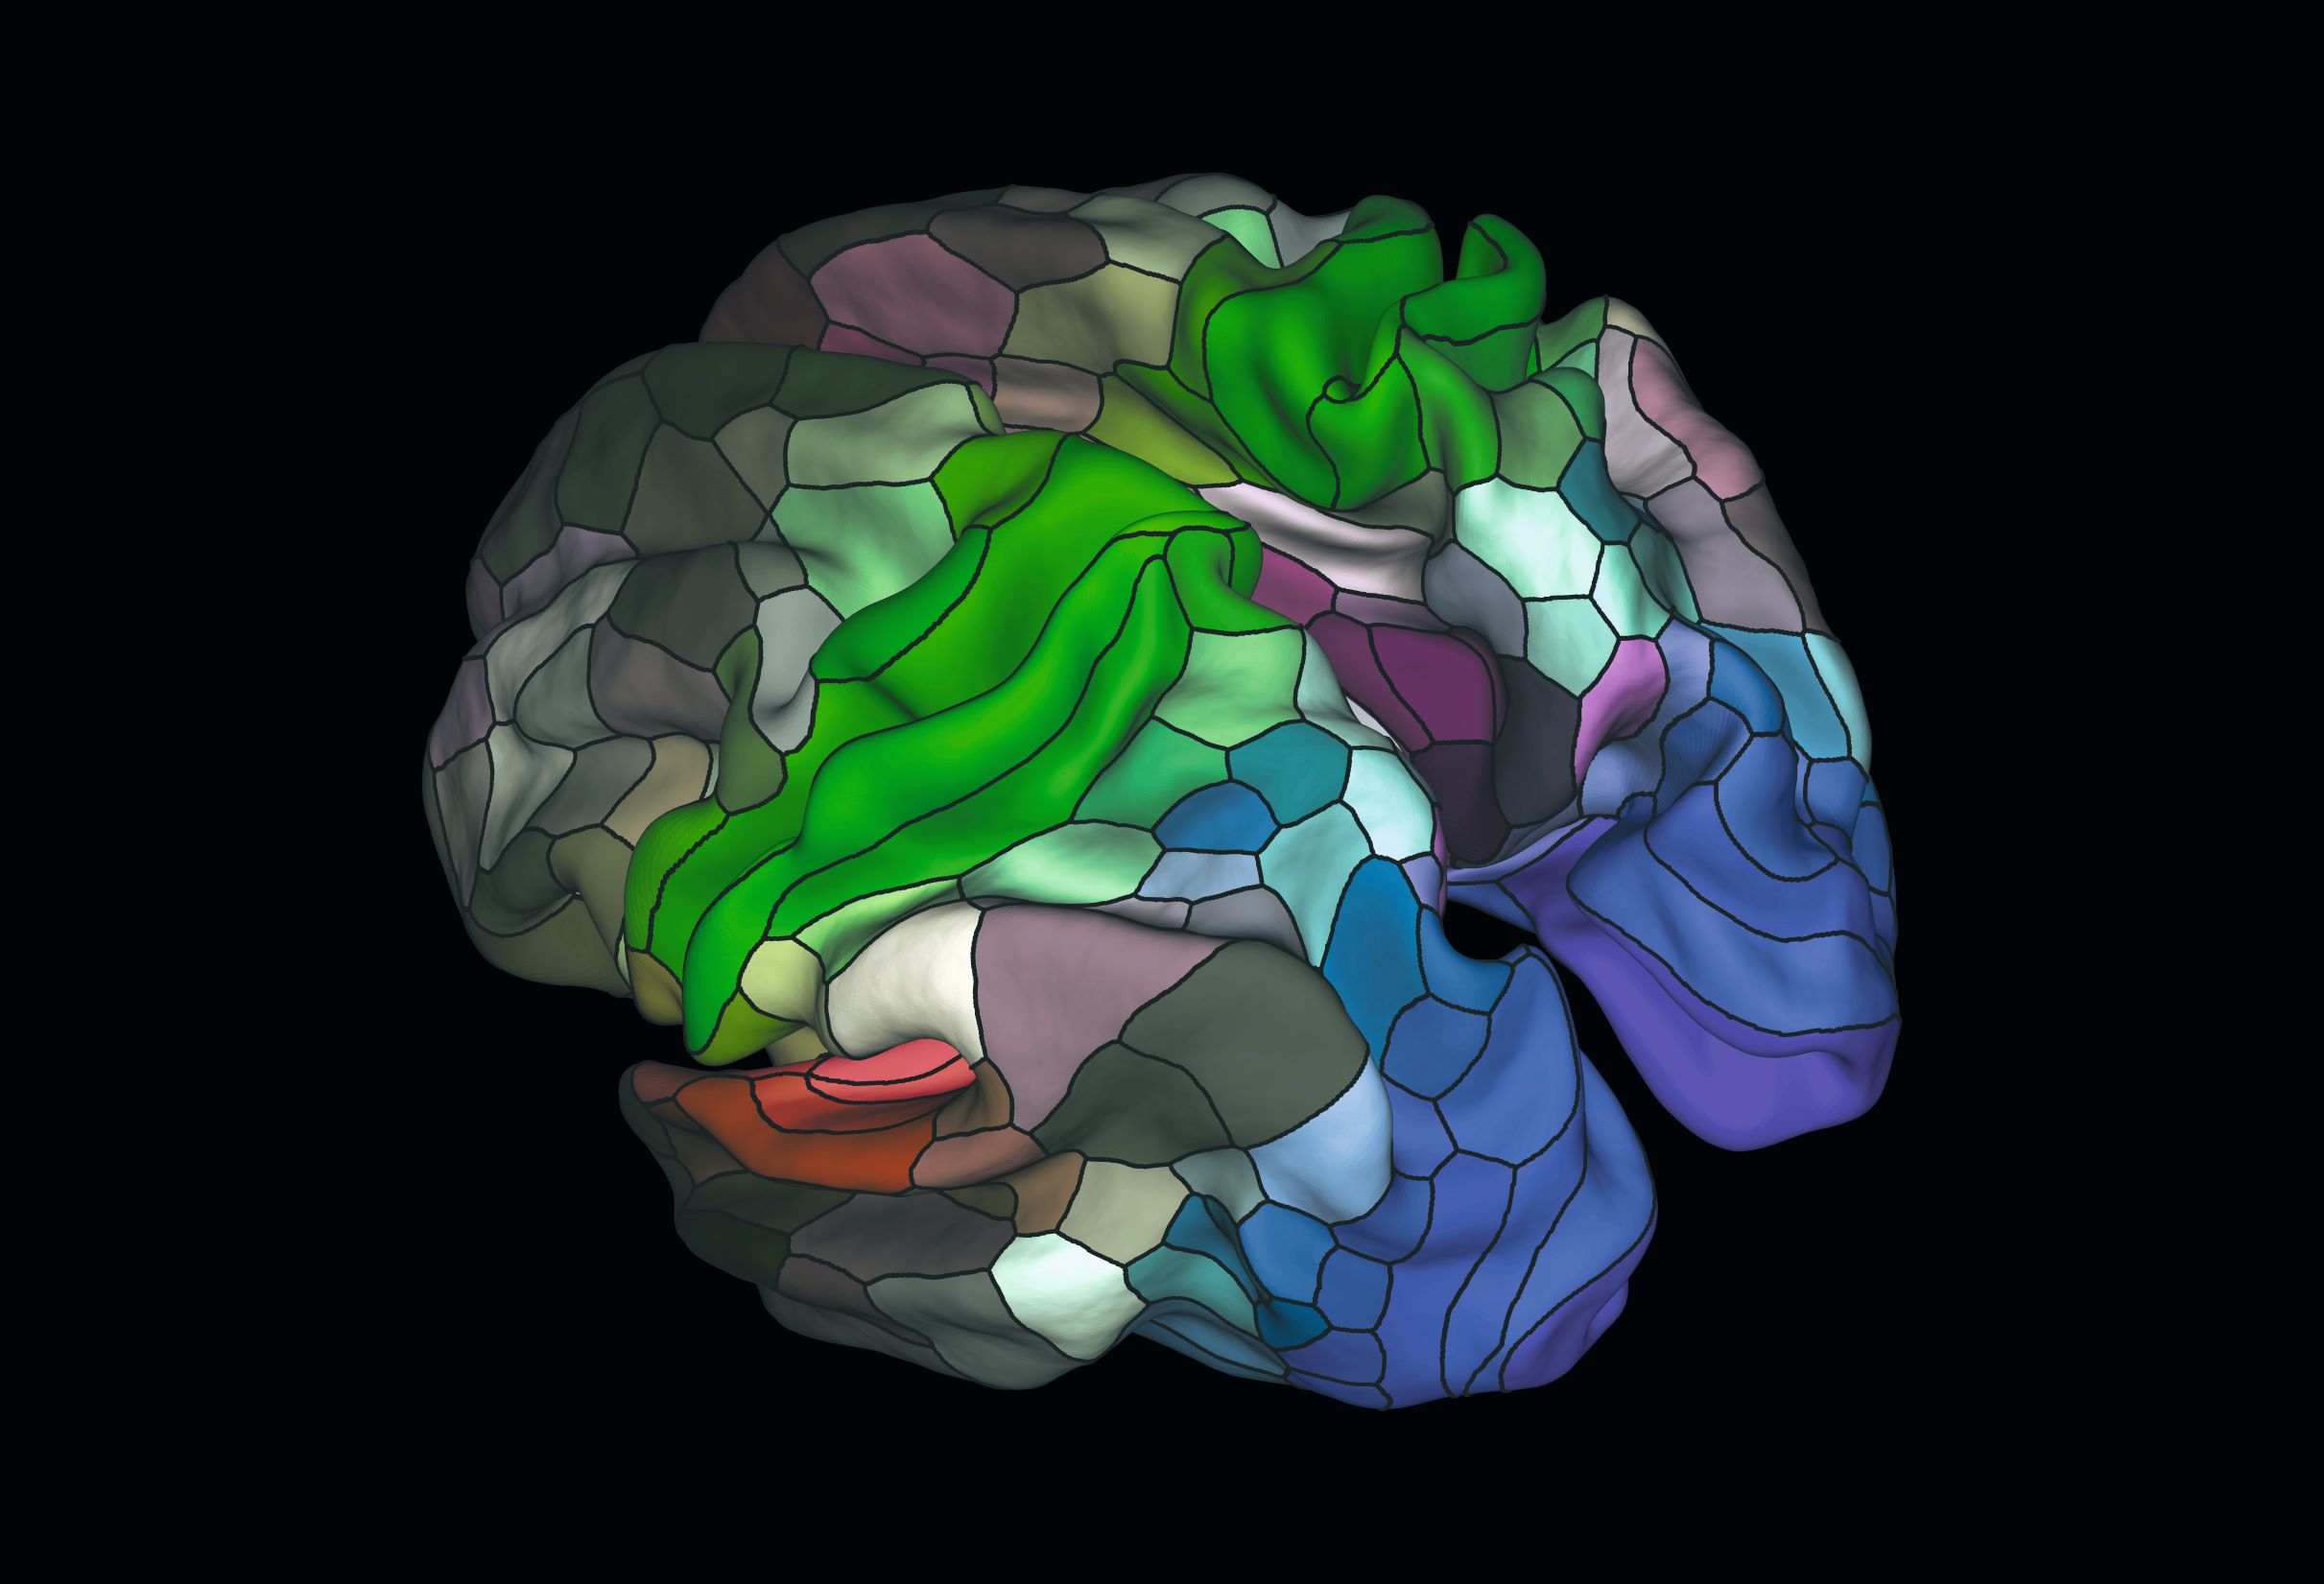 Brain map, 2016, by Matthew F. Glasser and David C. Van Essen. As featured in Anatomy: Exploring the Human Body